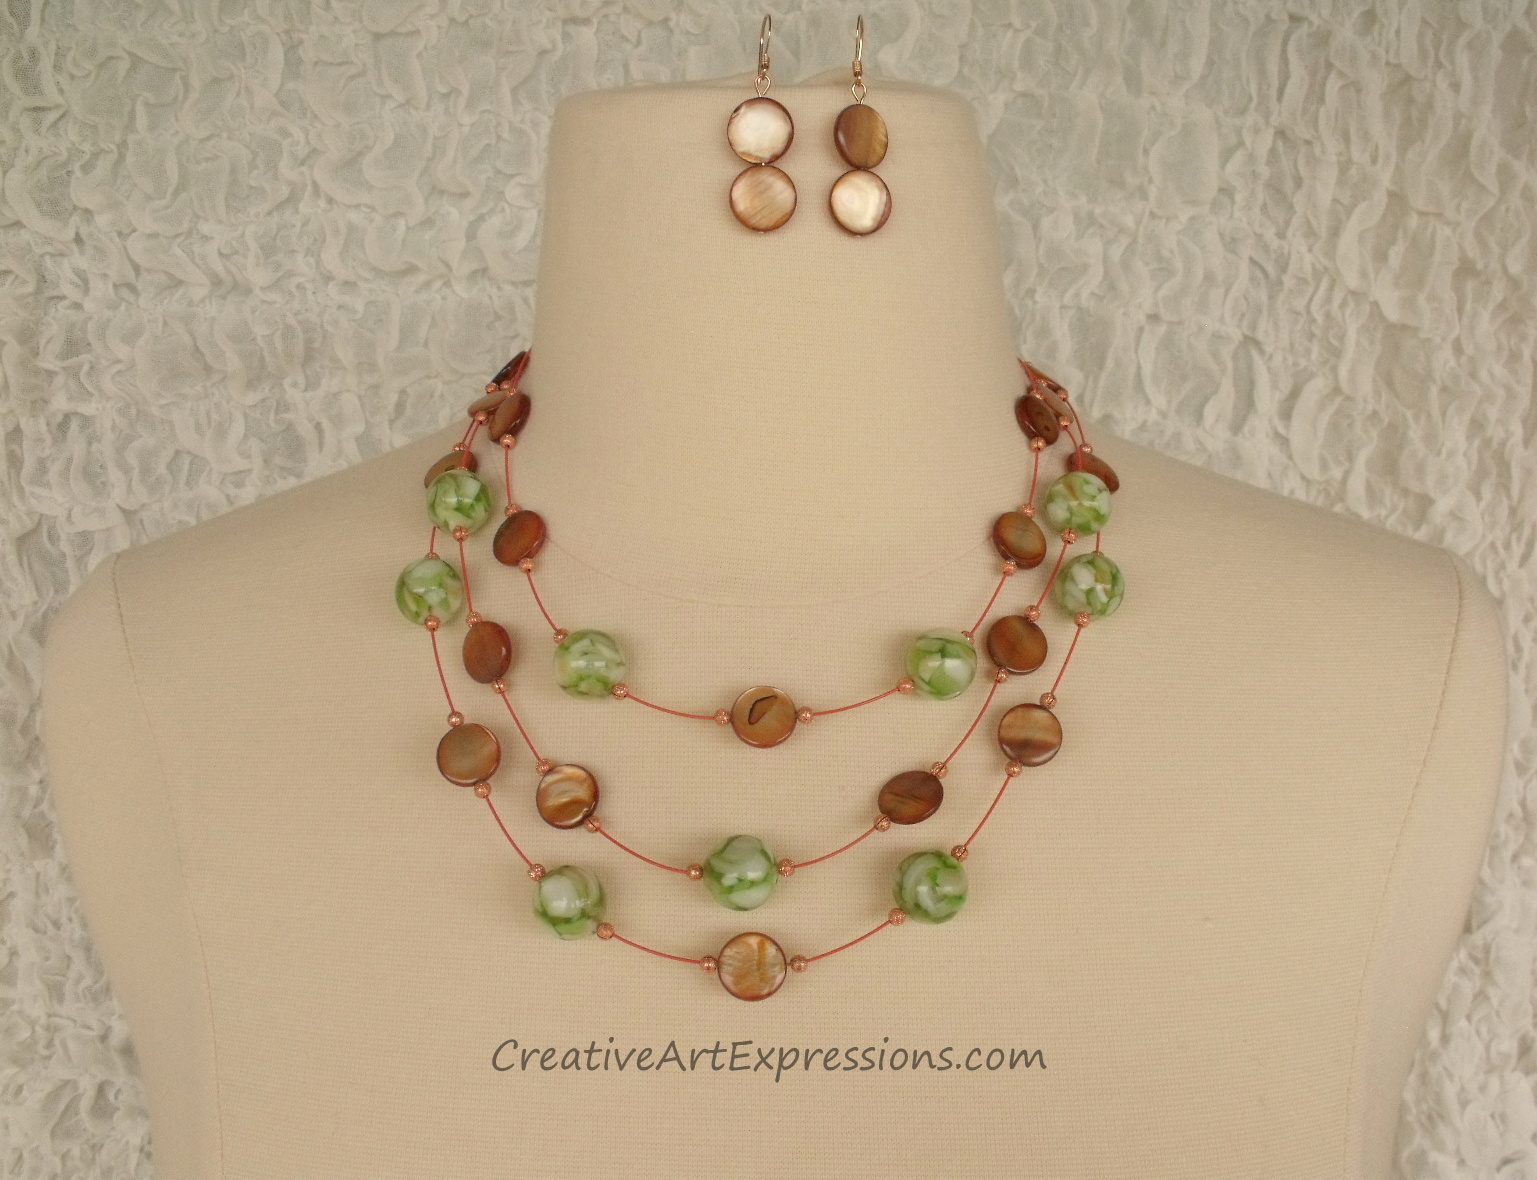 Green & Brown Mother of Pearl 3 Strand Necklace & Earrings Jewelry Design